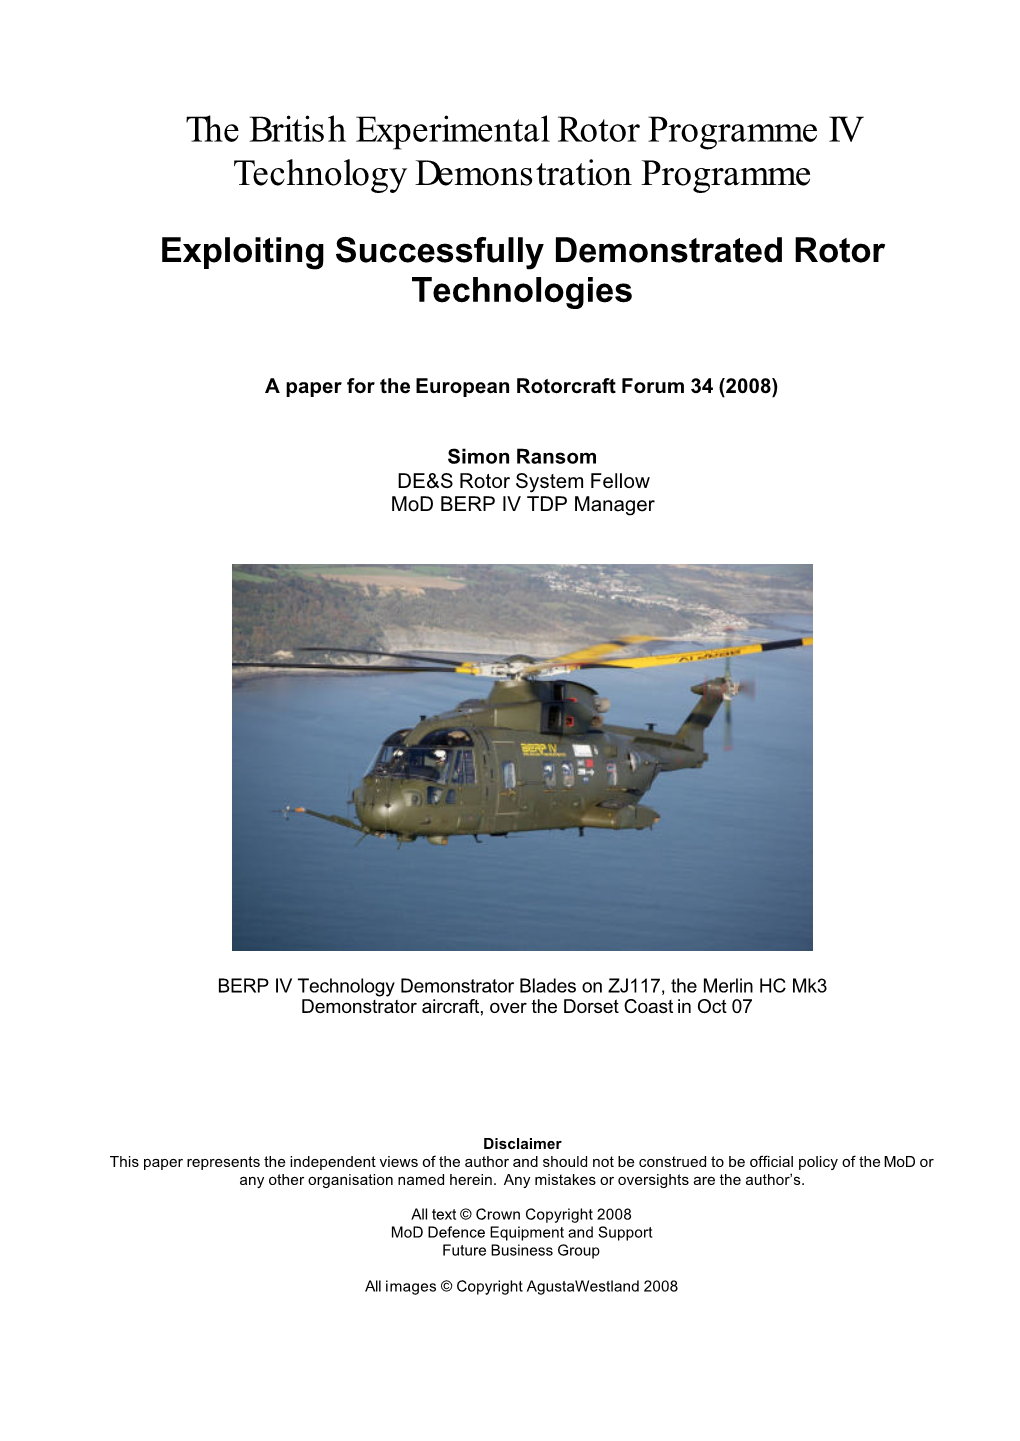 Exploiting Successfully Demonstrated Rotor Technologies